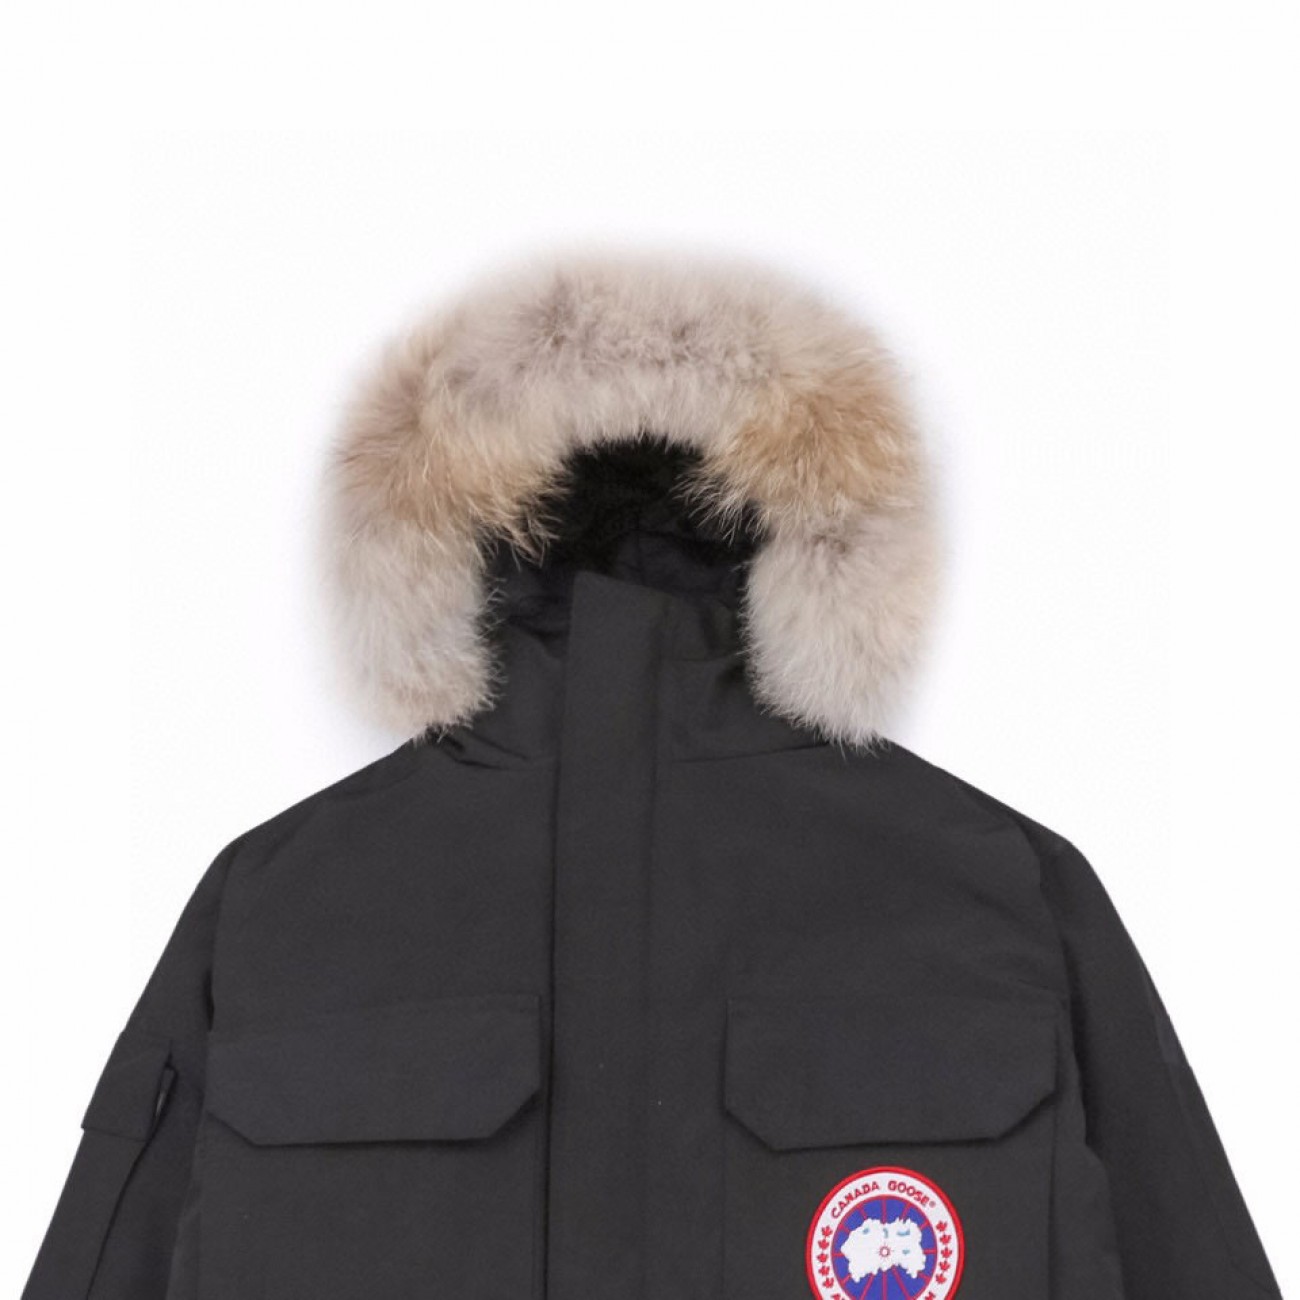 08 ' Canada Goose '19FW Expedition 4660MA Down Jacket Coat "Black"